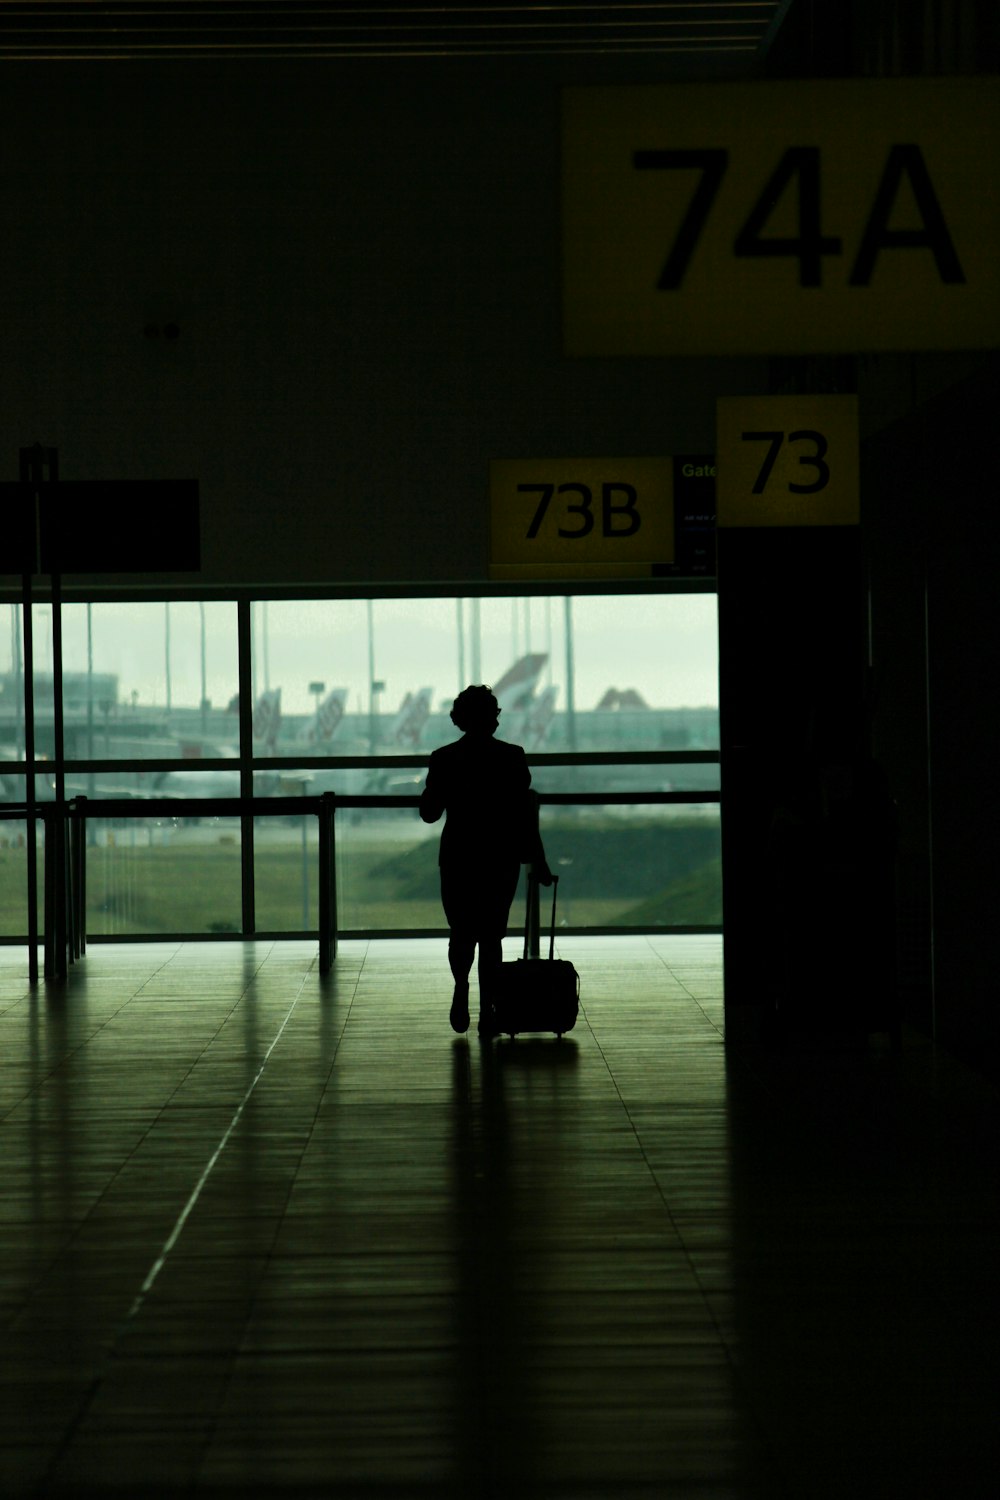 a person with a suitcase walking through an airport